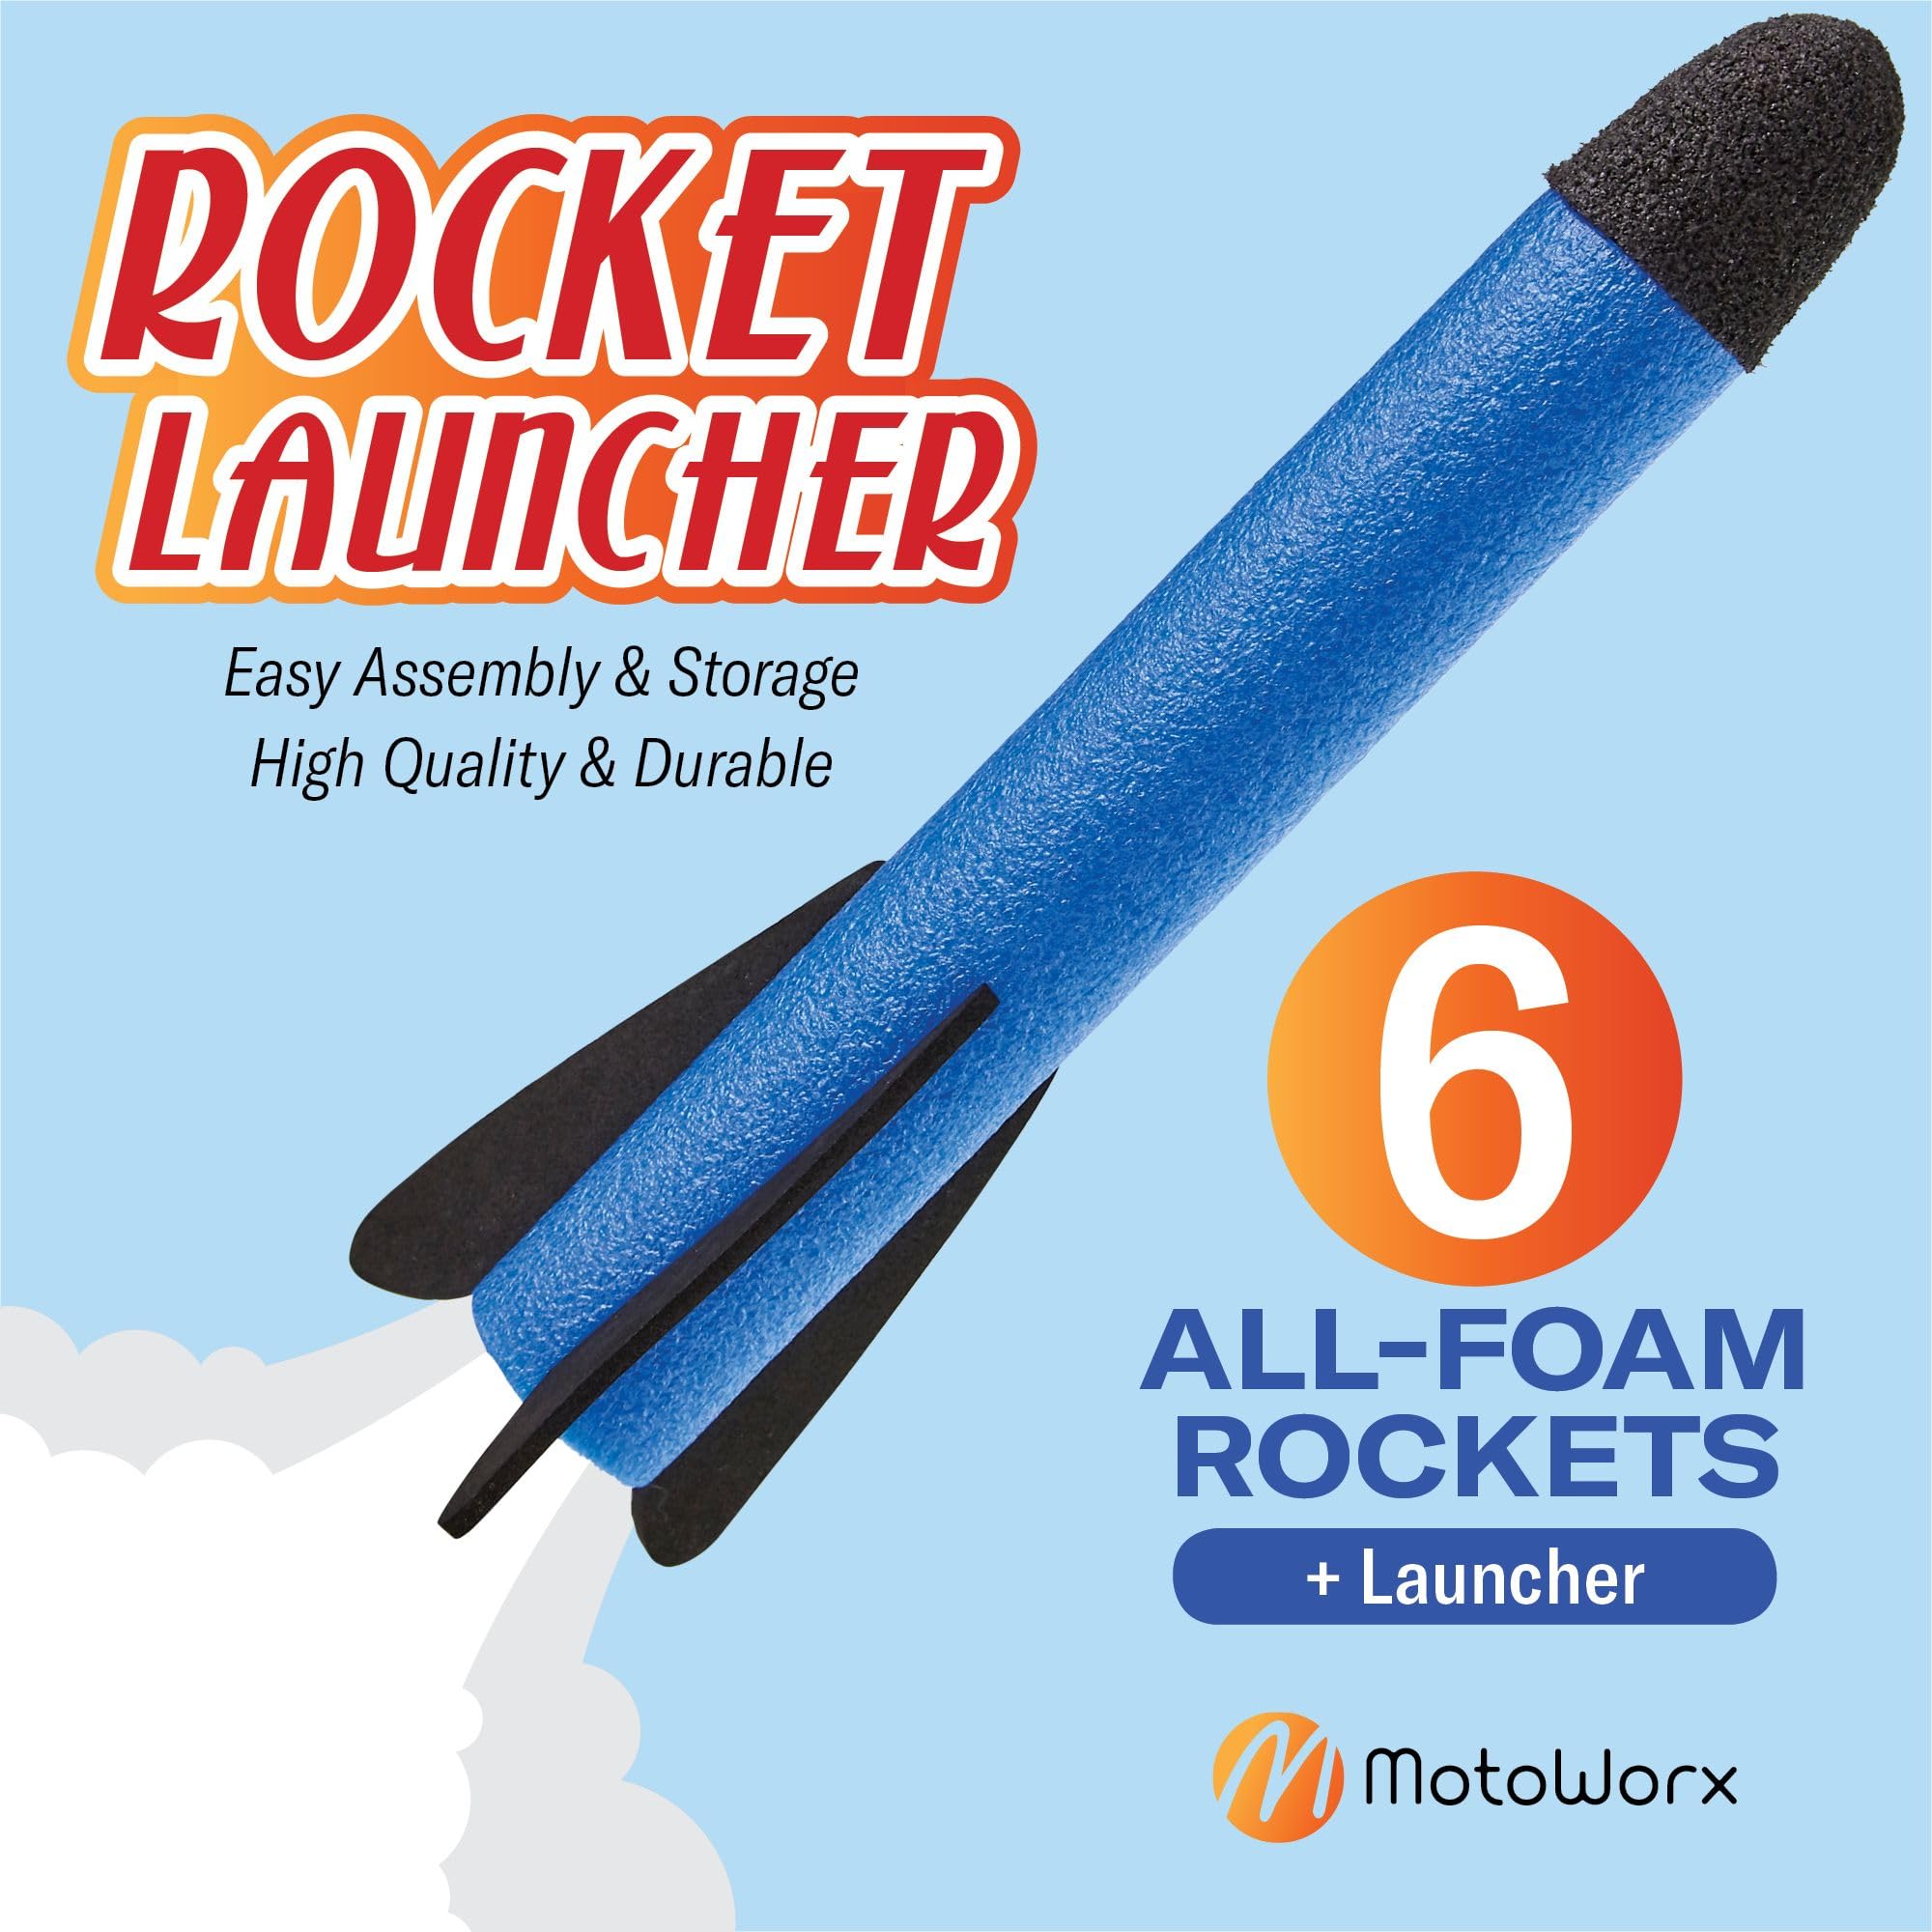 Toy Rocket Launcher for Kids – Shoots Up to 100 Feet – 6 Colorful Foam Rockets and Sturdy Launcher Stand, Stomp Launch Pad - Fun Outdoor Toy for Kids - Gift Toys for Boys and Girls Age 3+ Years Old